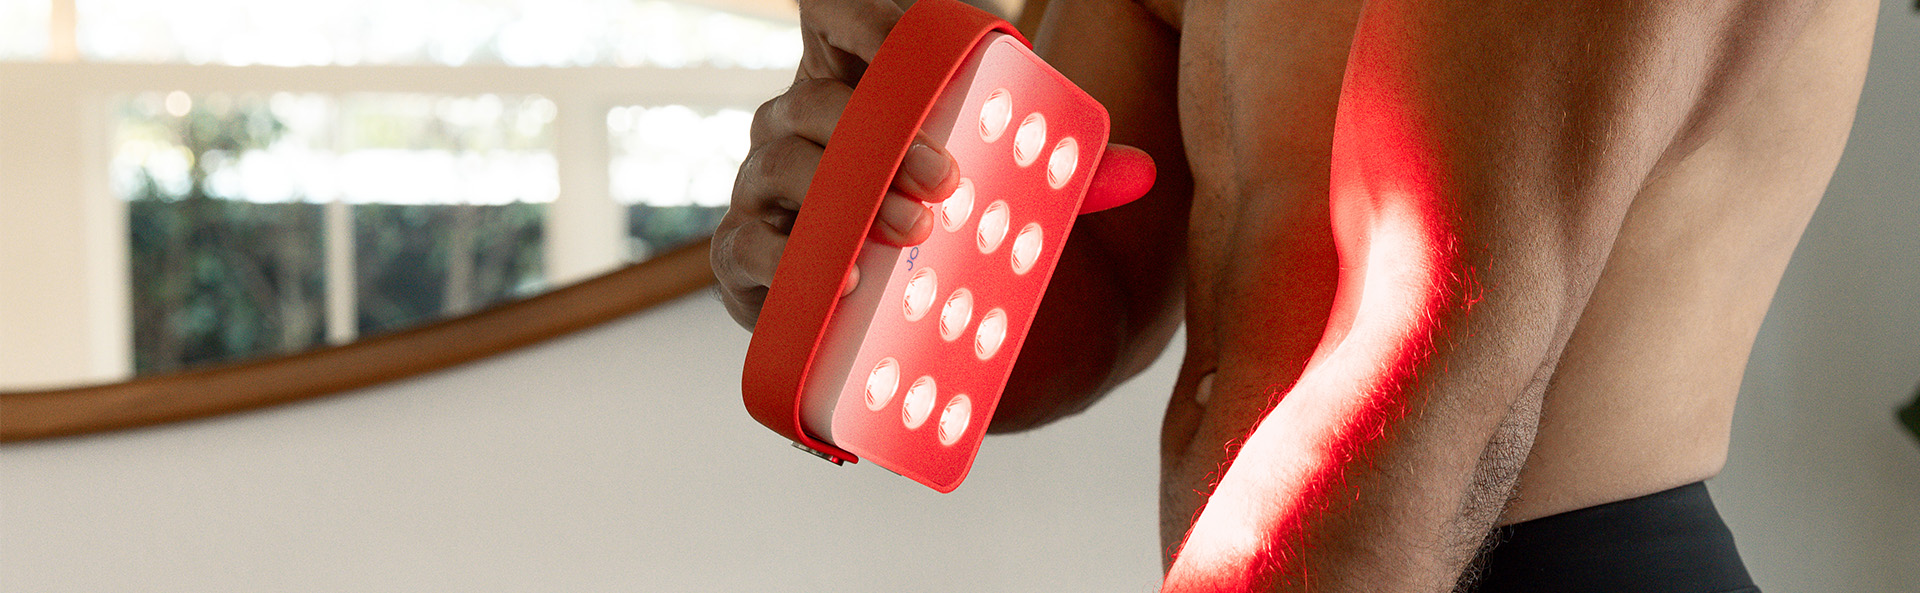 The Go 2.0, Portable Handheld Red Light Therapy